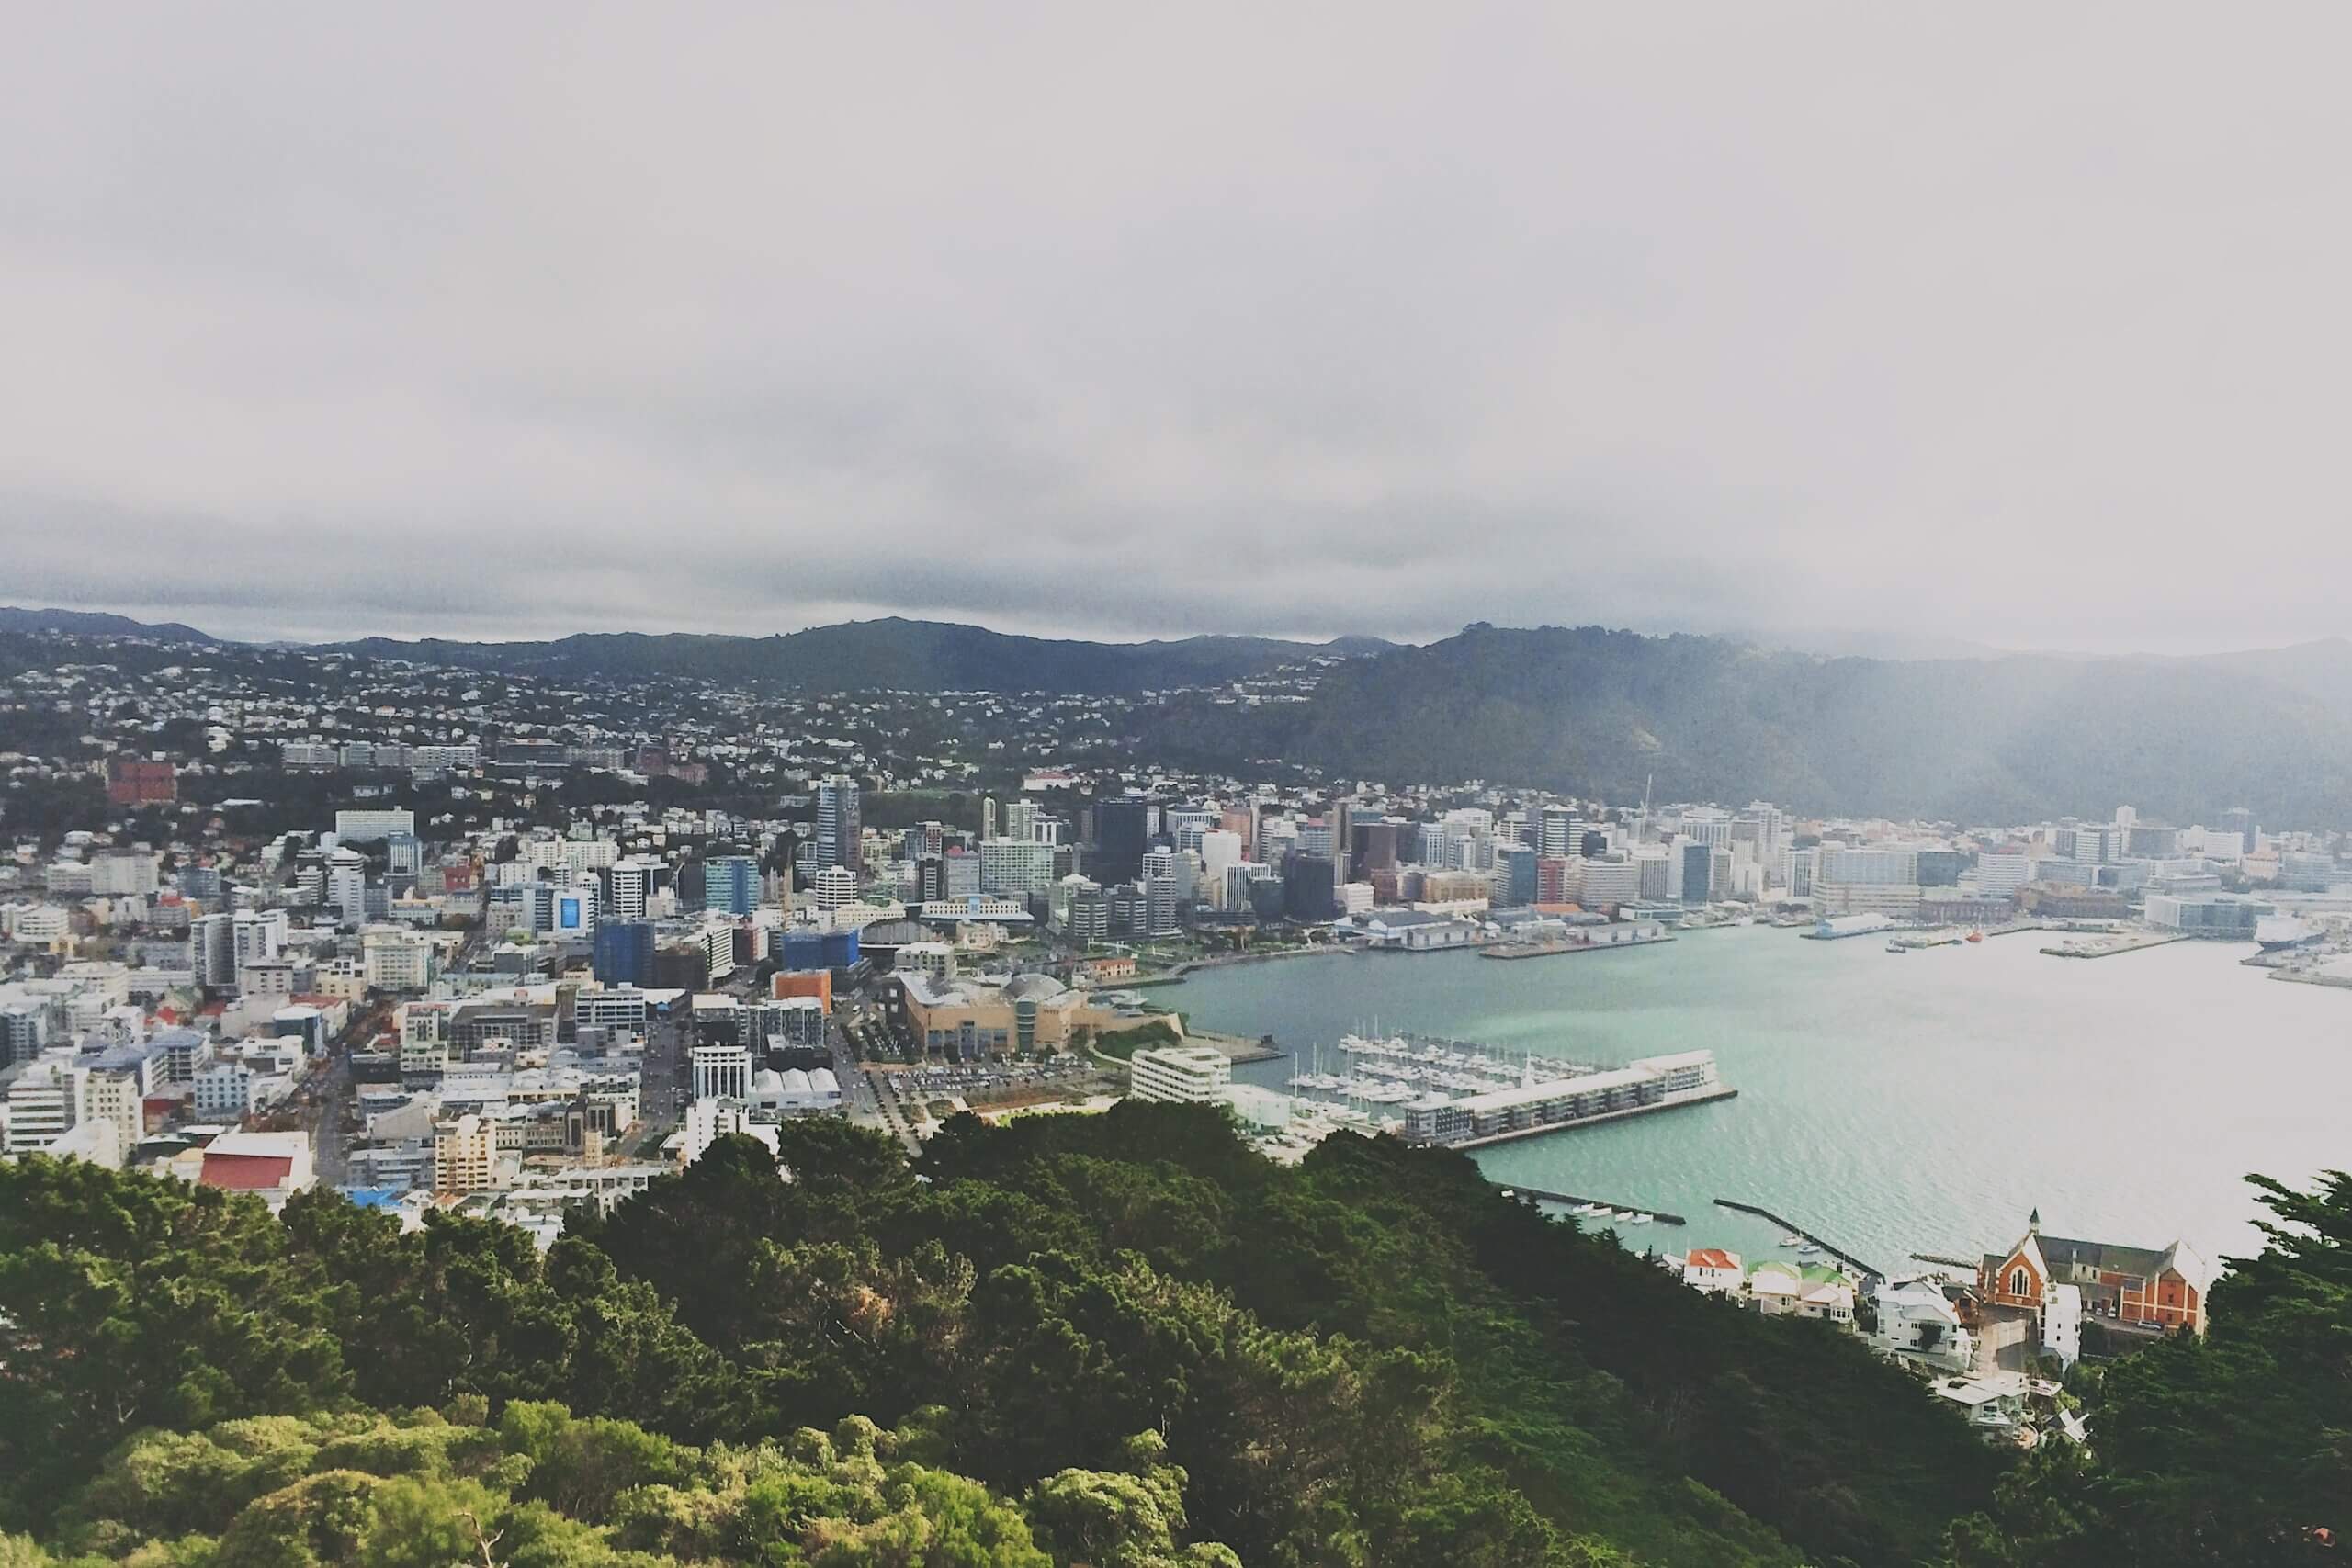 Wellington is one of the top cities to visit on new Zealand's North Island